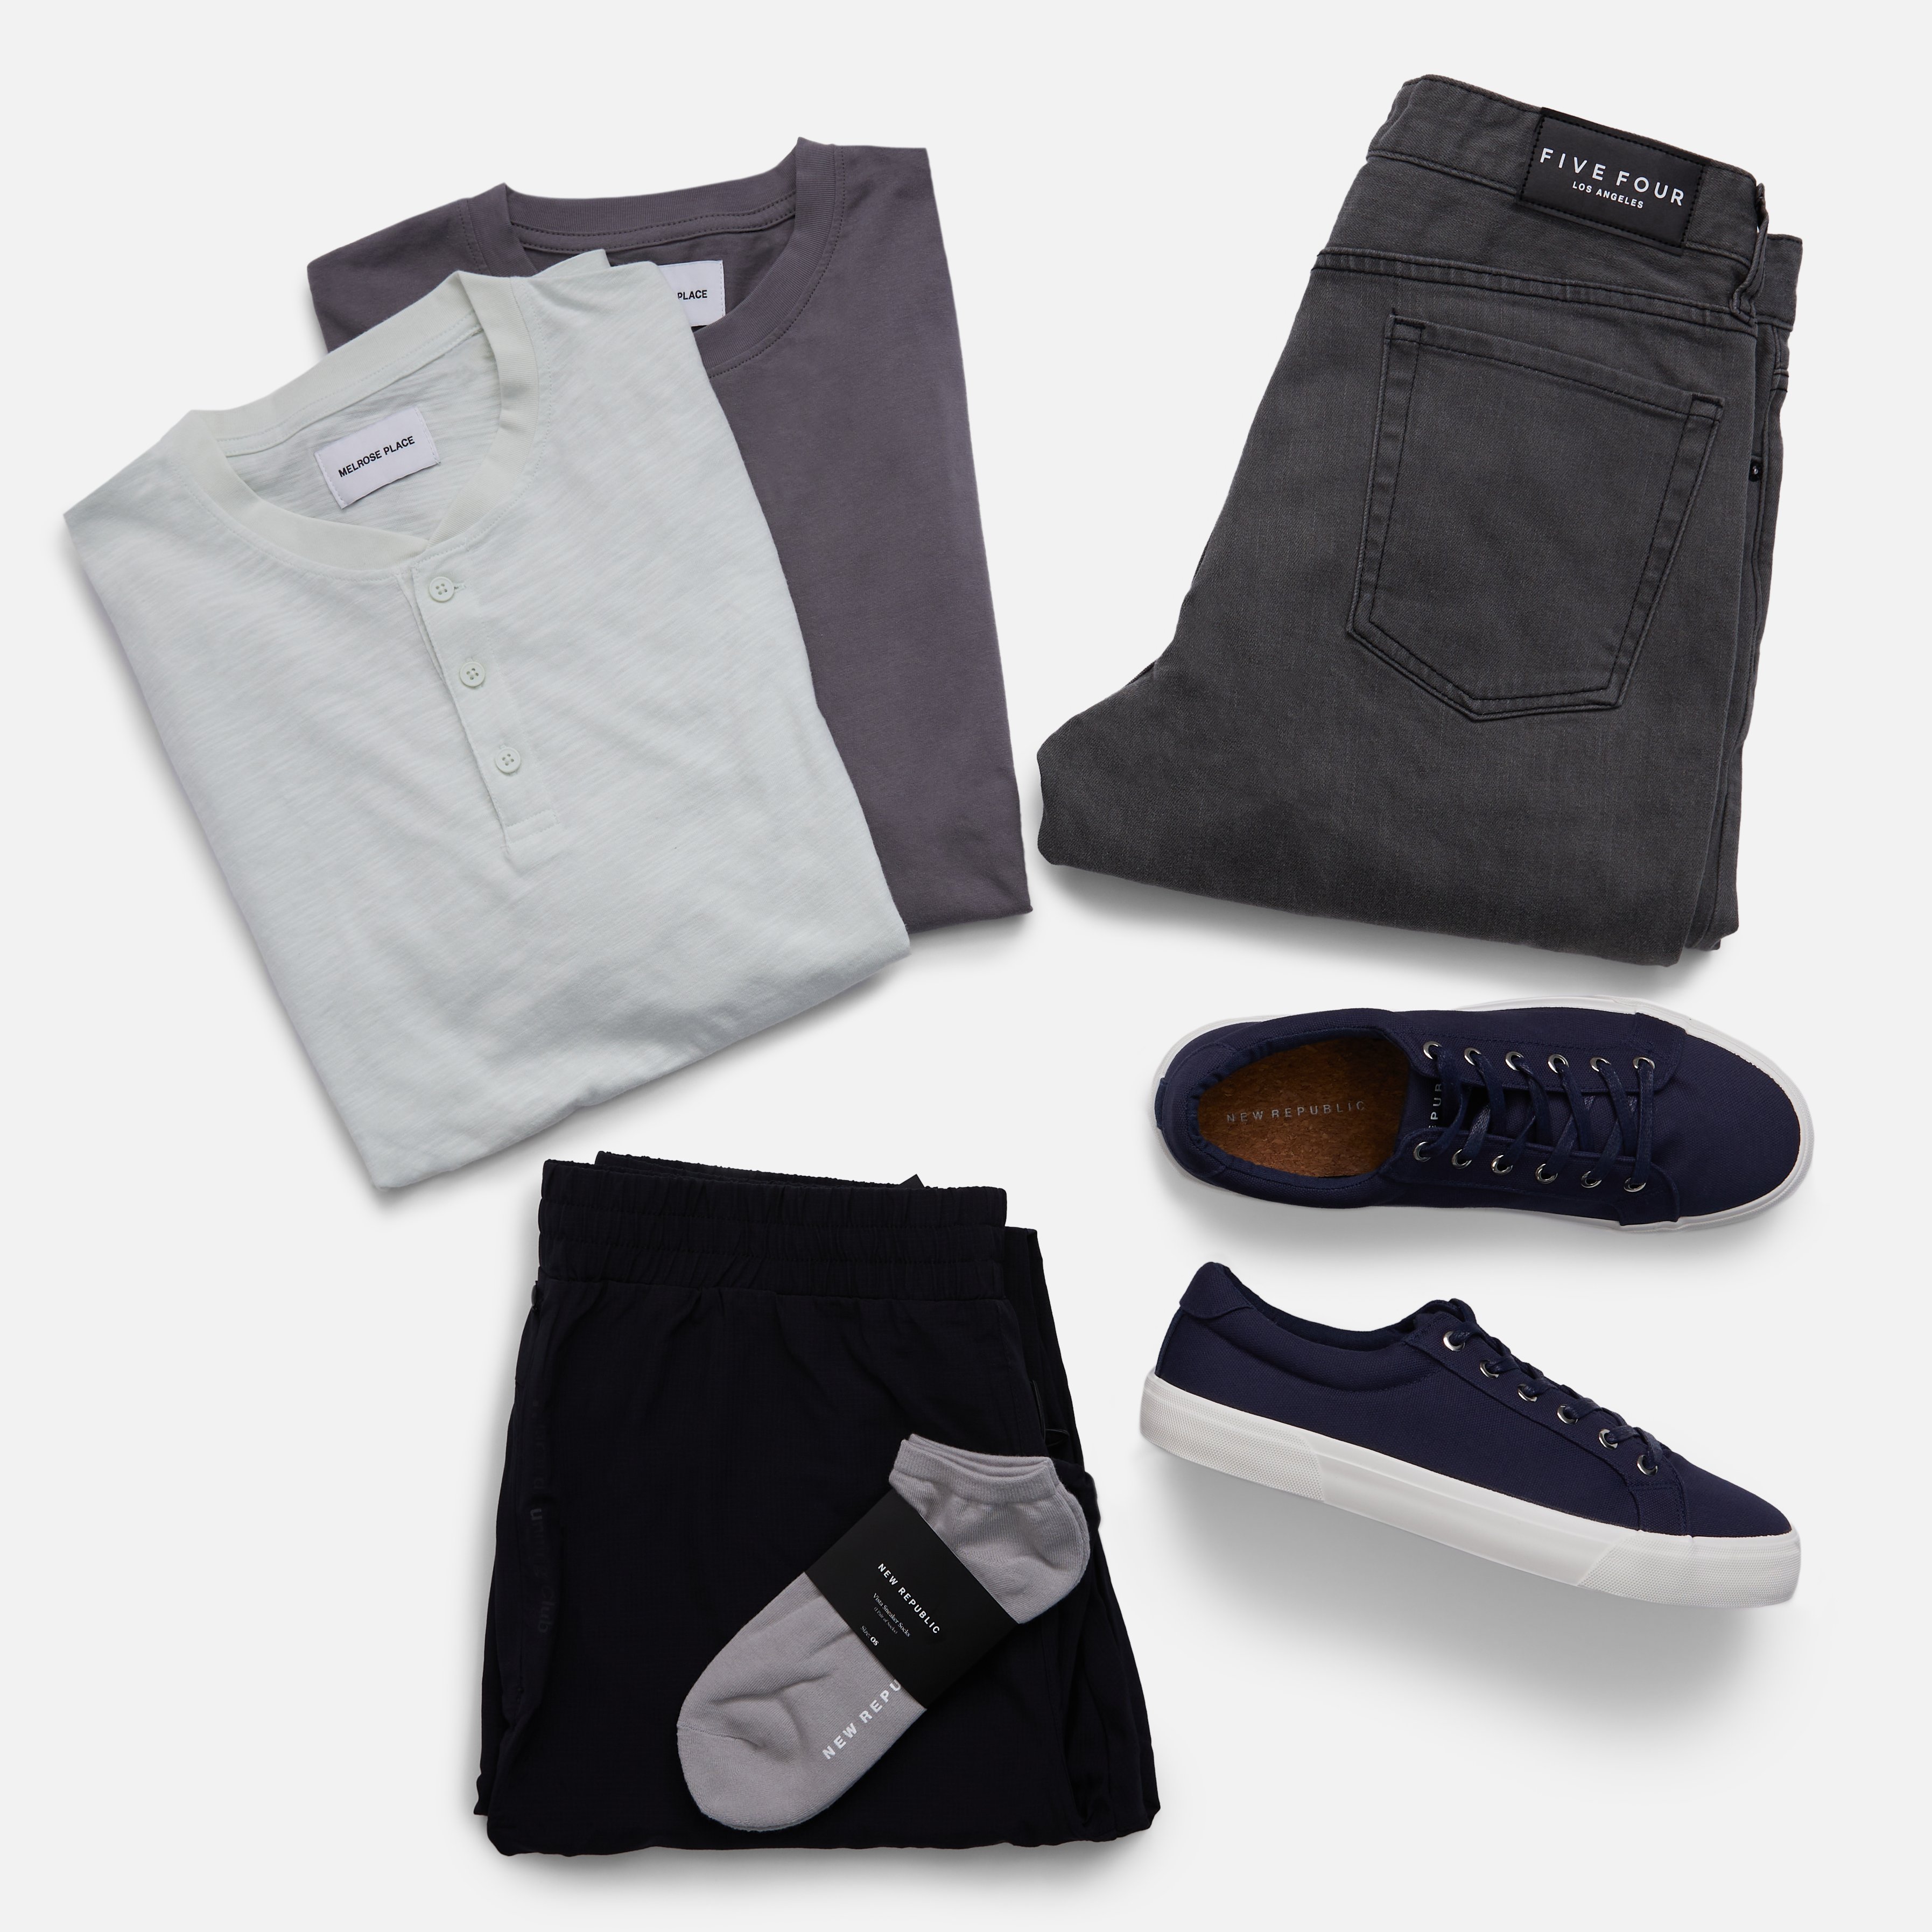 Menlo Club: Get a Mid-Life Crisis Clothing Bundle (Valued at $175) for only $35